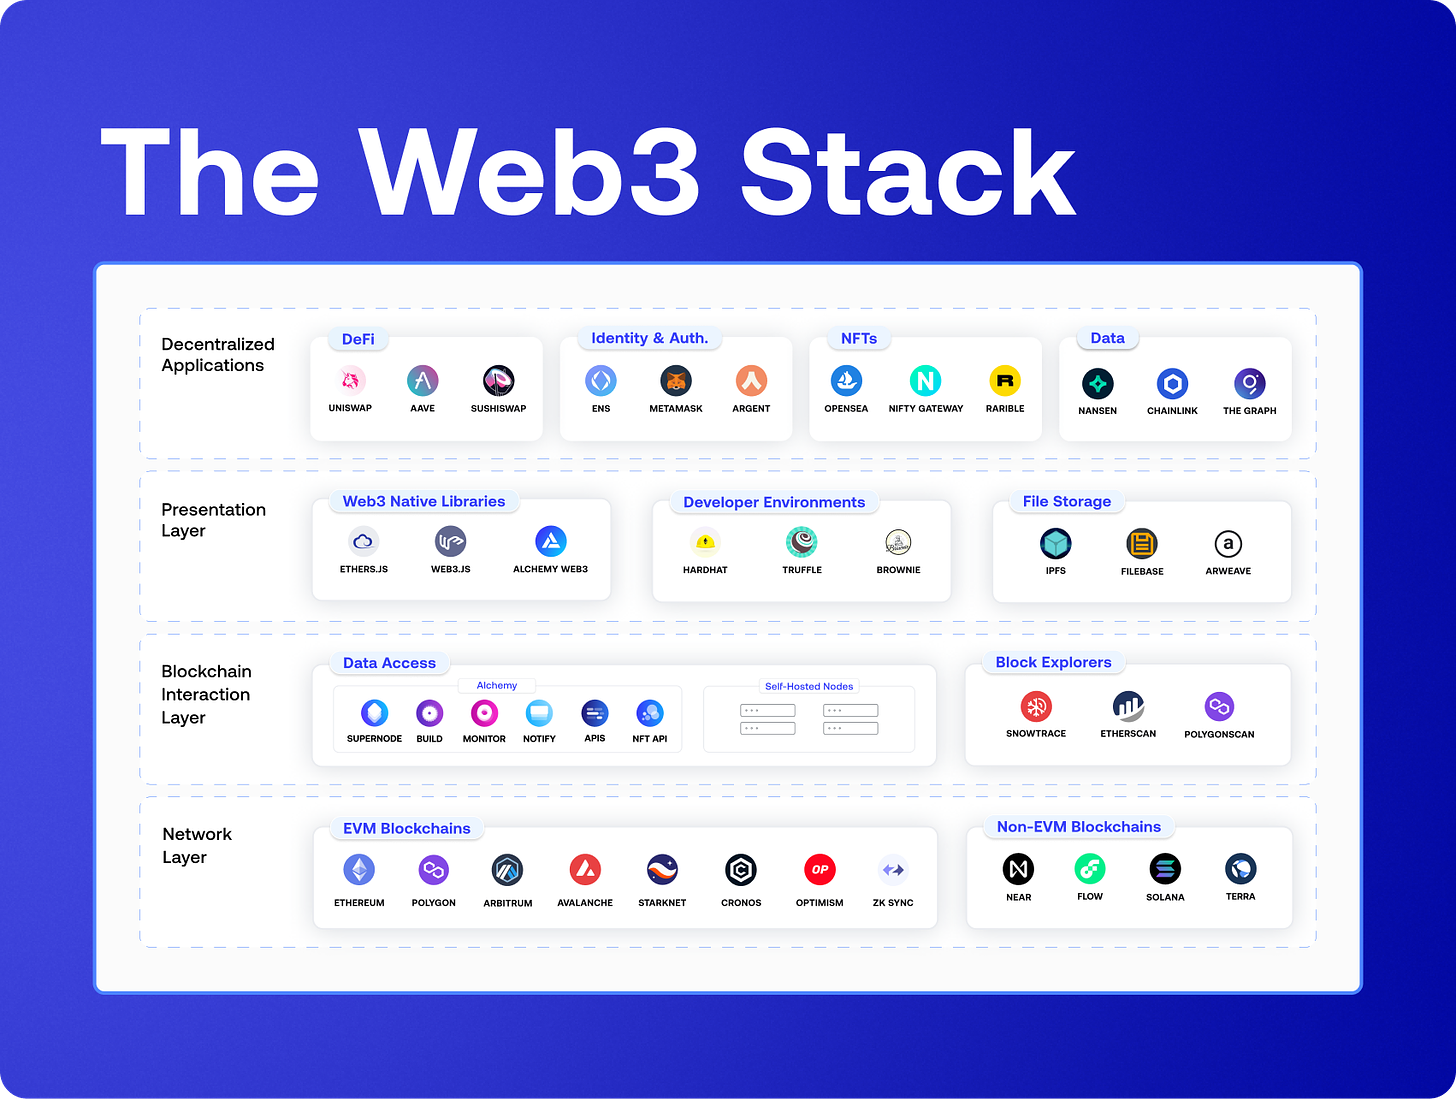 A Developer's Guide to the Web3 Stack